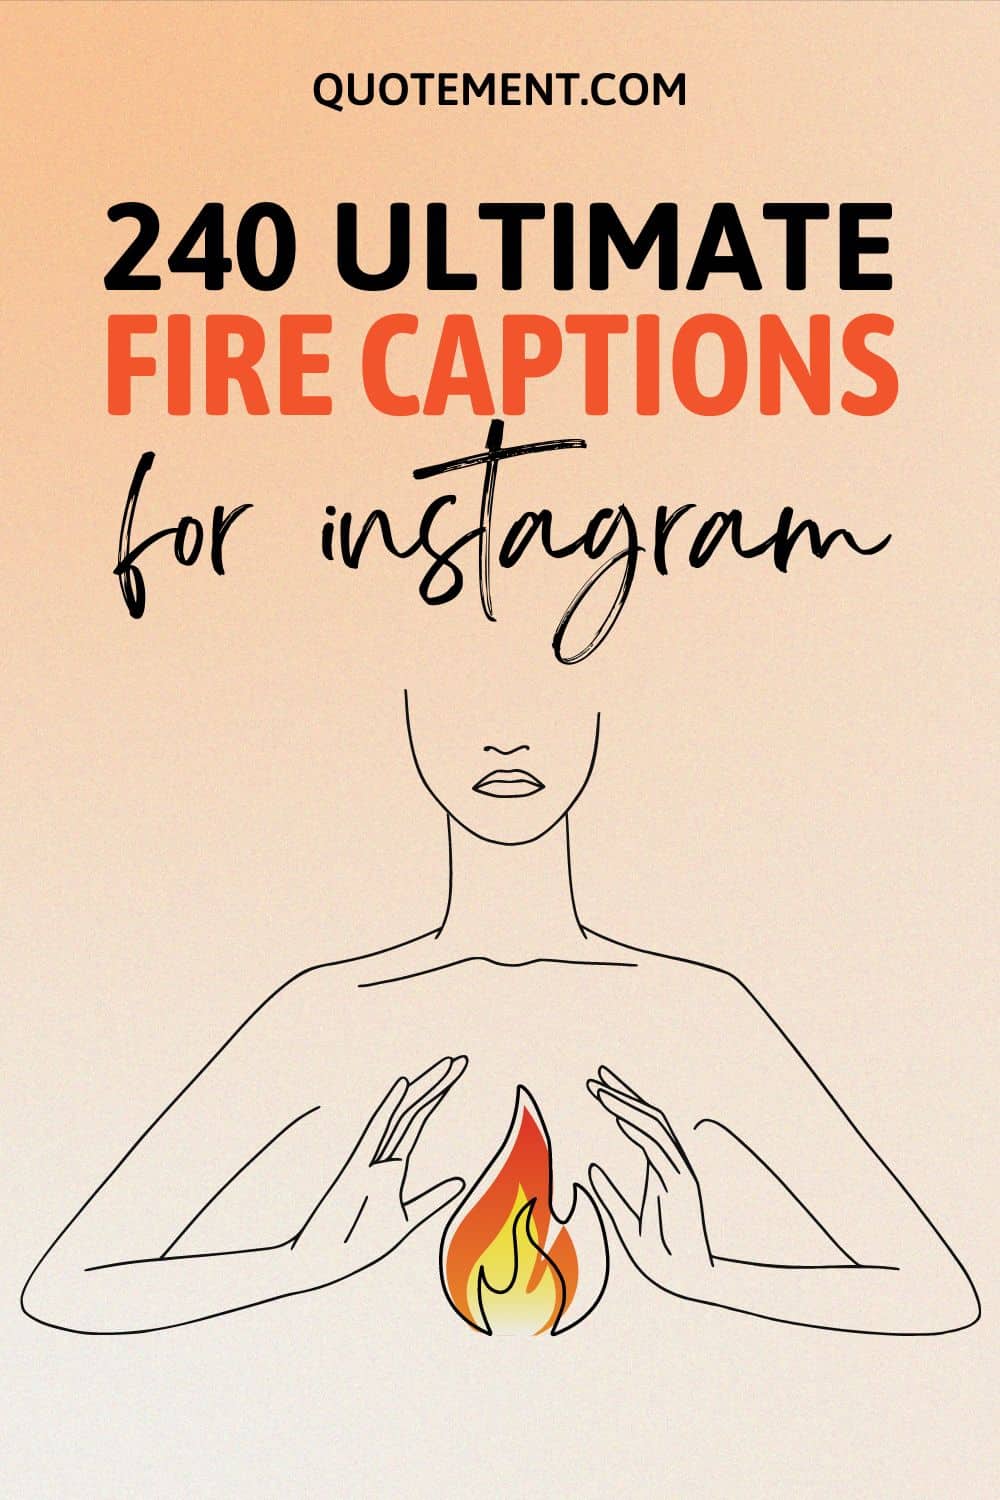 240 Fire Captions For Instagram To Set The World On Fire
